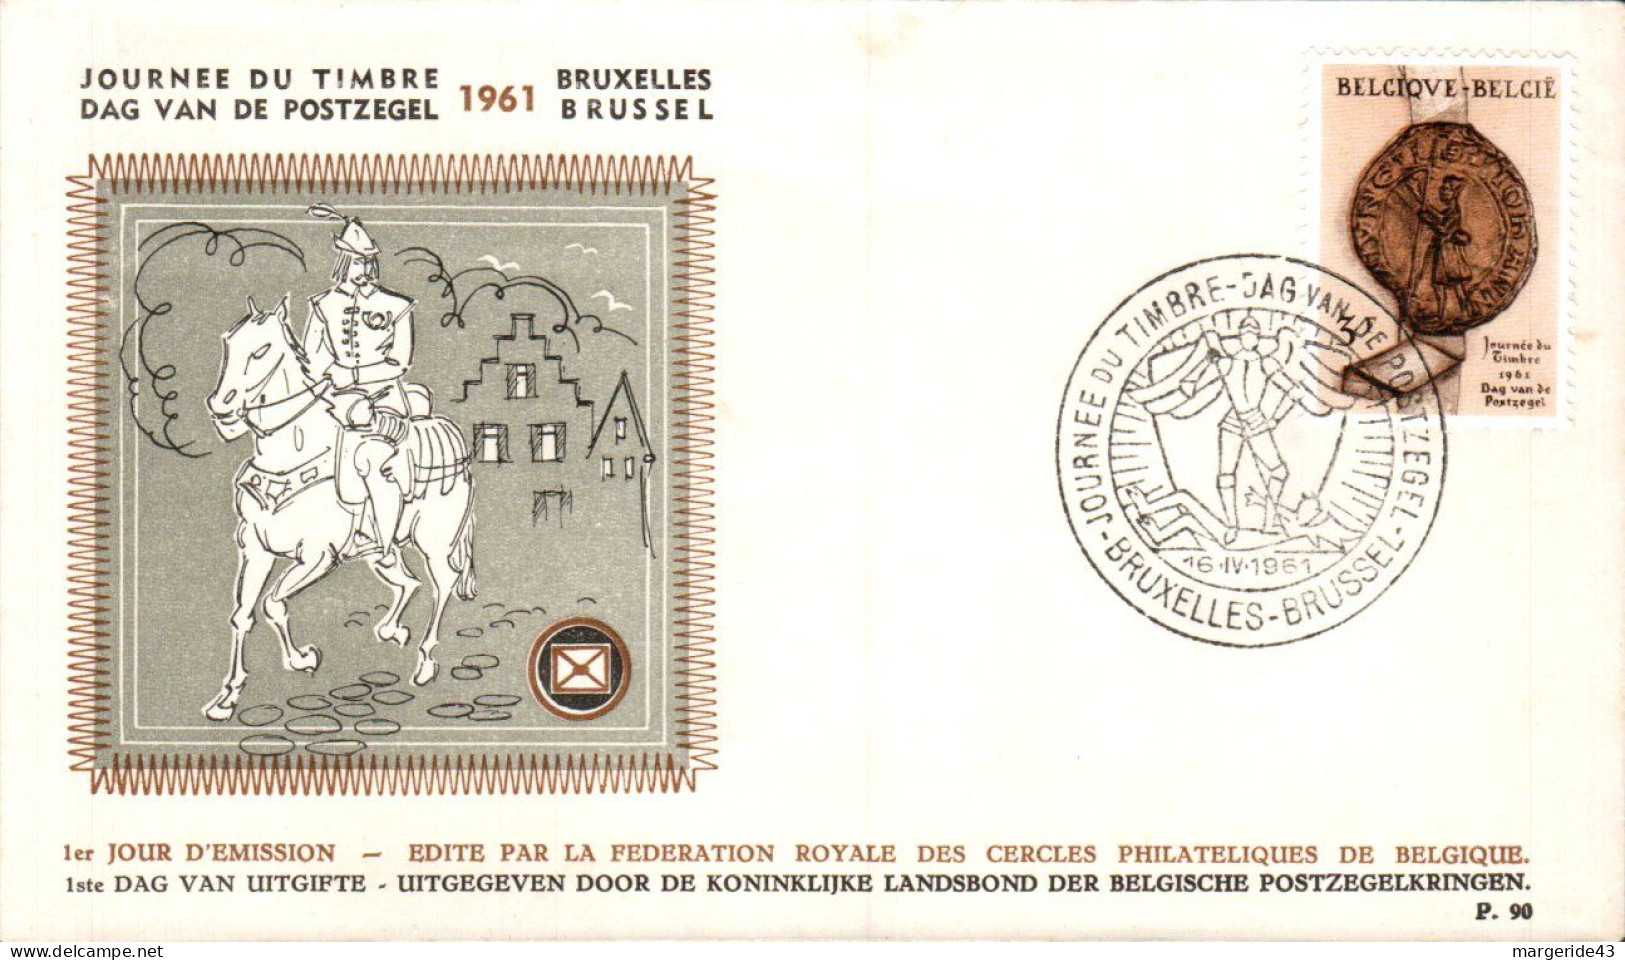 BELGIQUE FDC 1961 JOURNEE DU TIMBRE - Stamp's Day